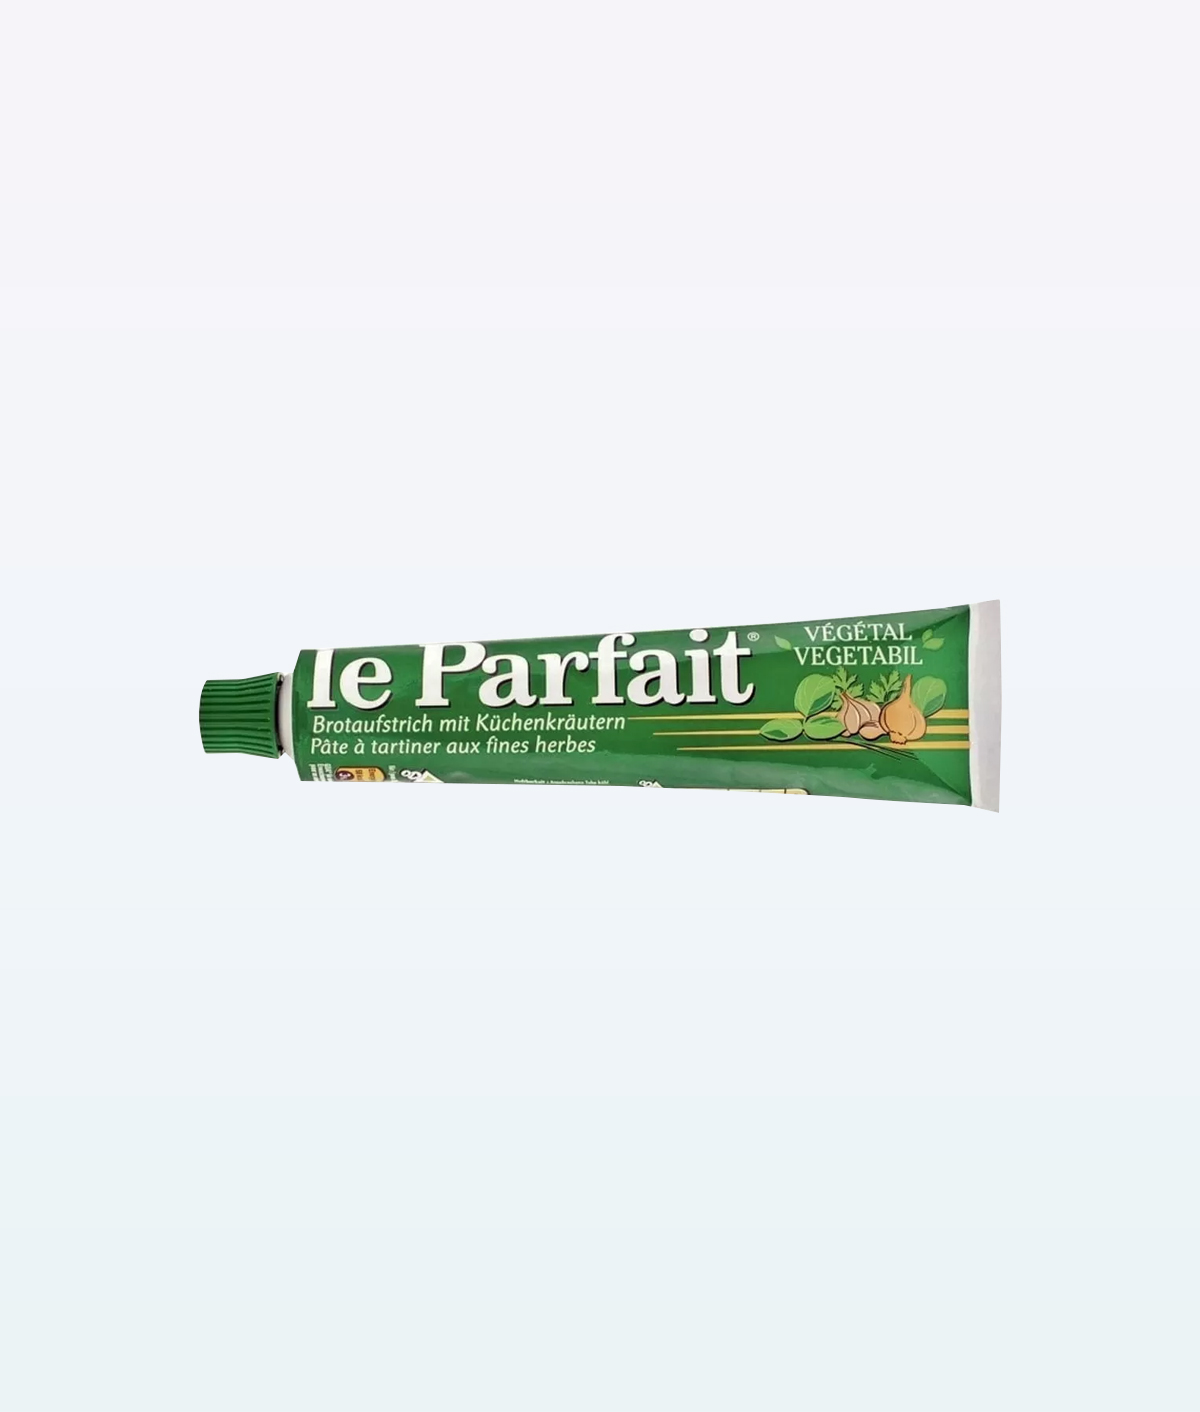 Le Parfait Herbs Get them Online from- Swissmade Direct